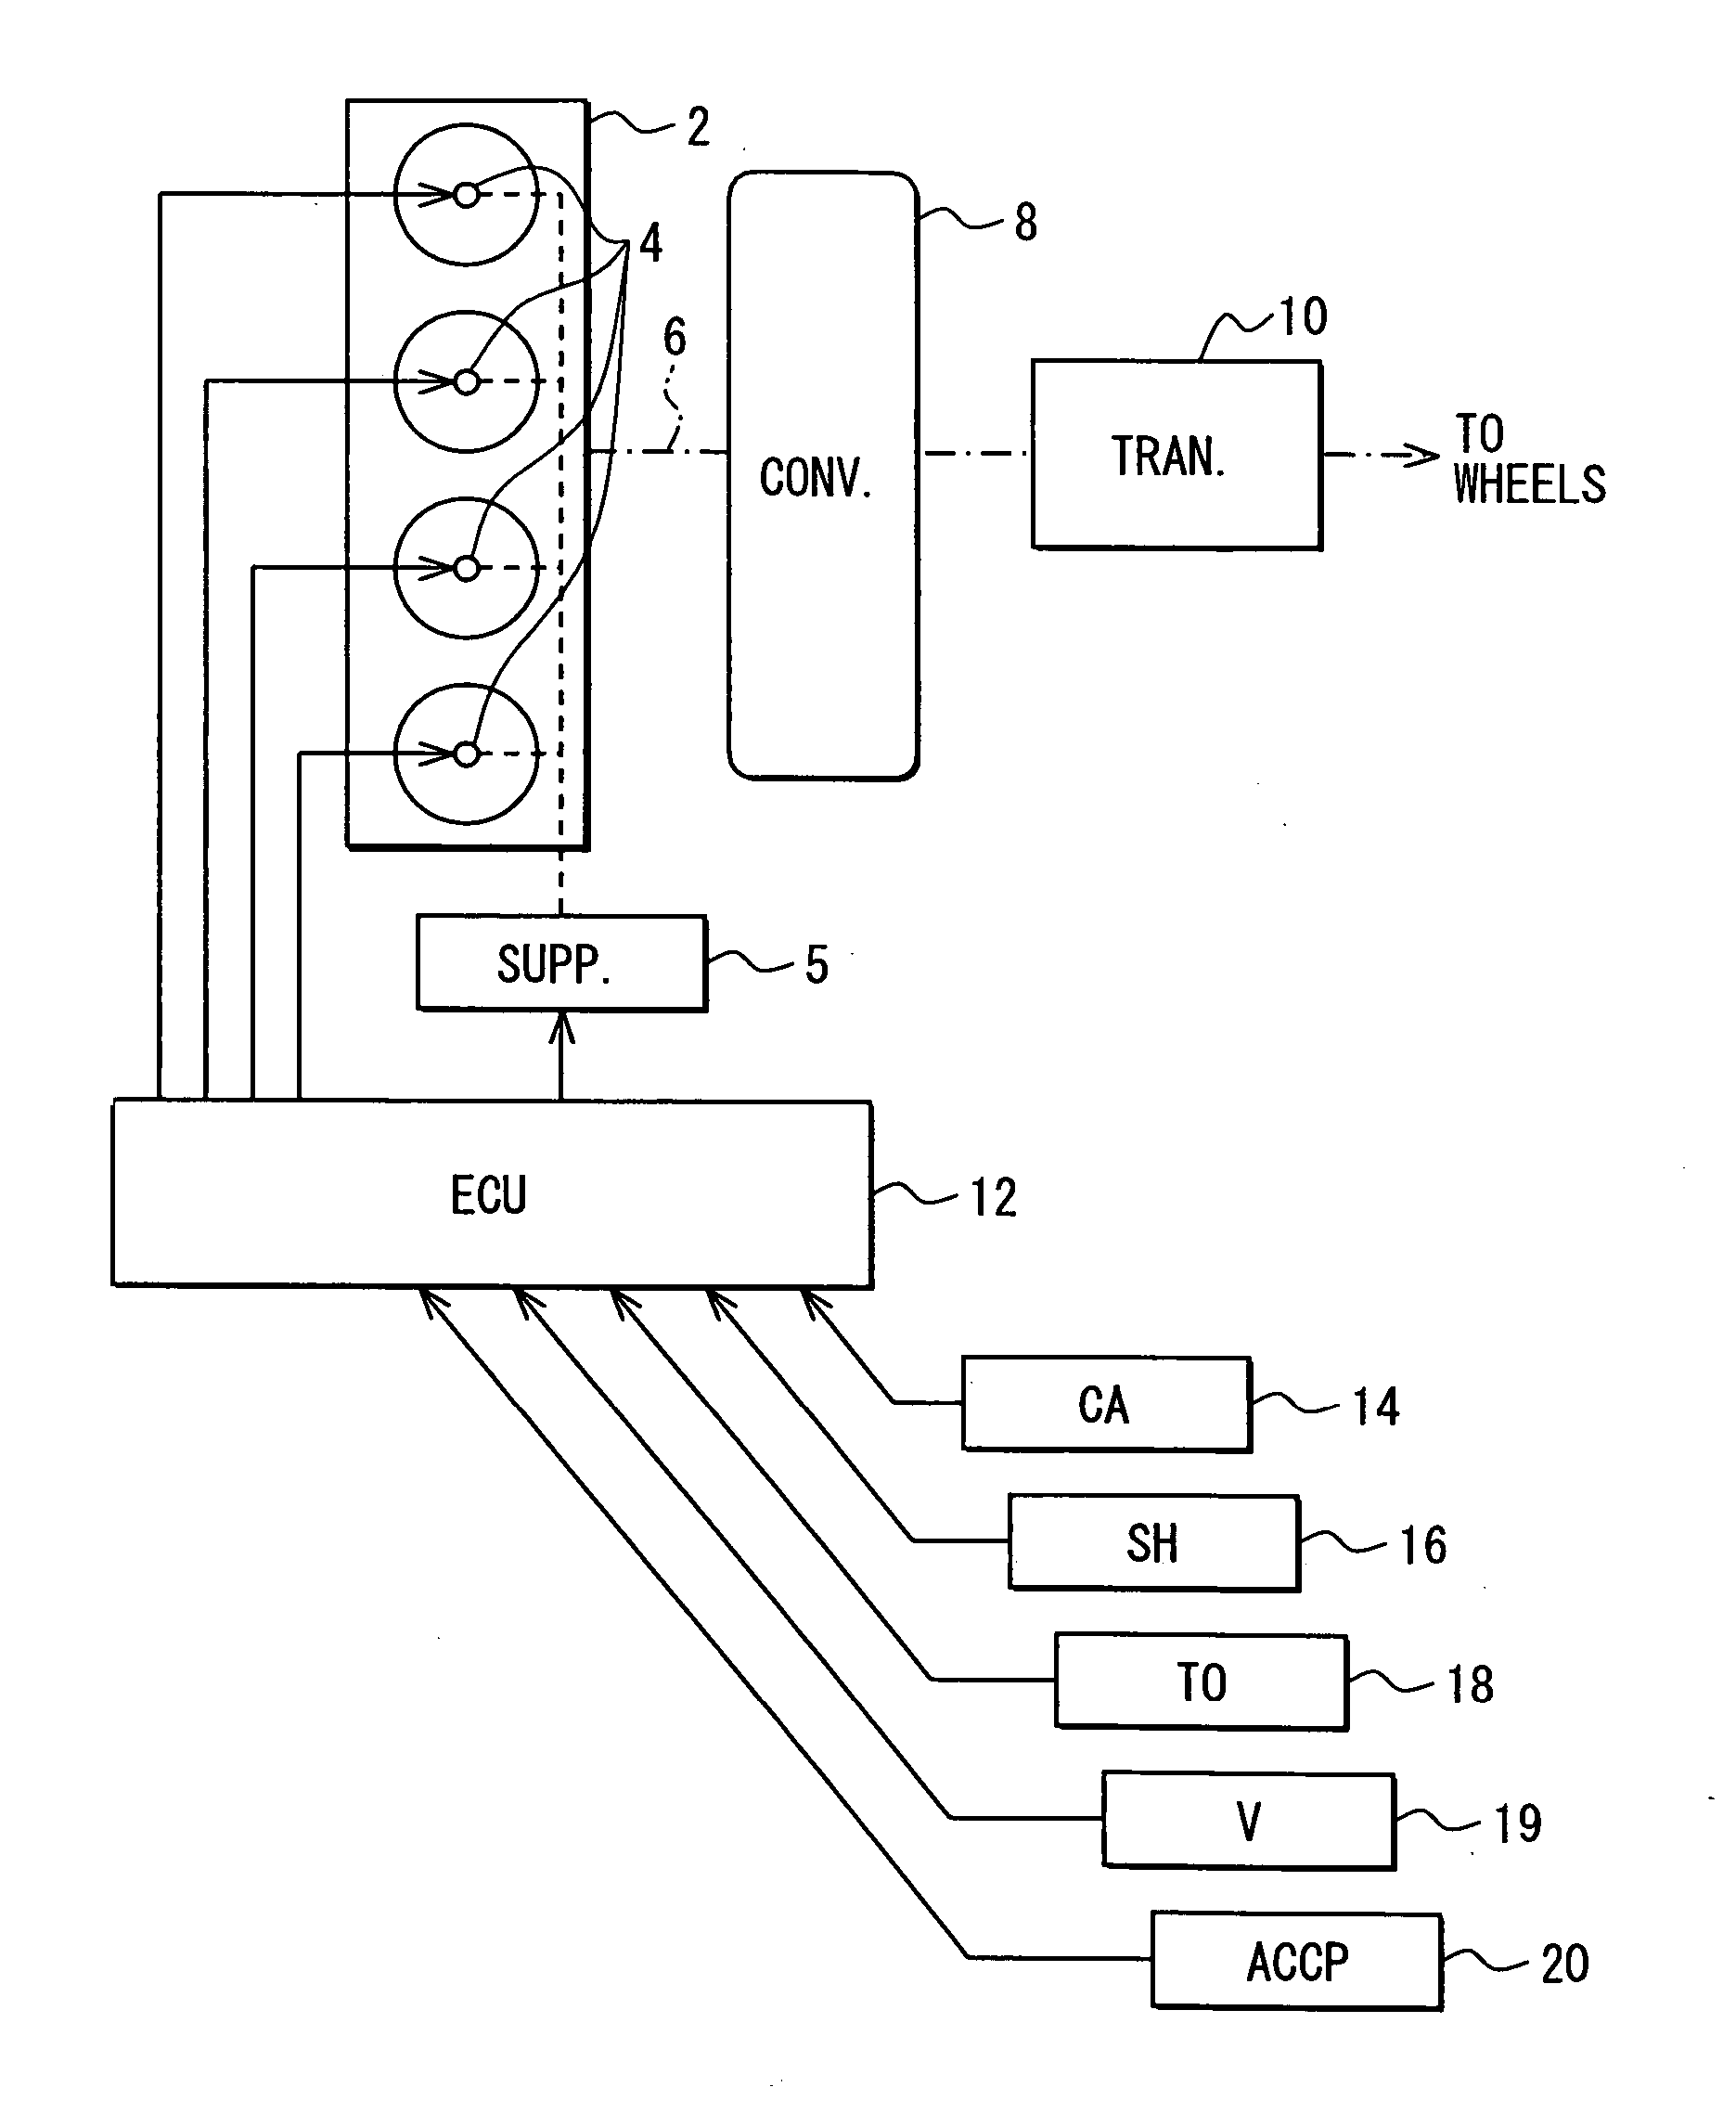 Fuel injection controller of internal combustion engine